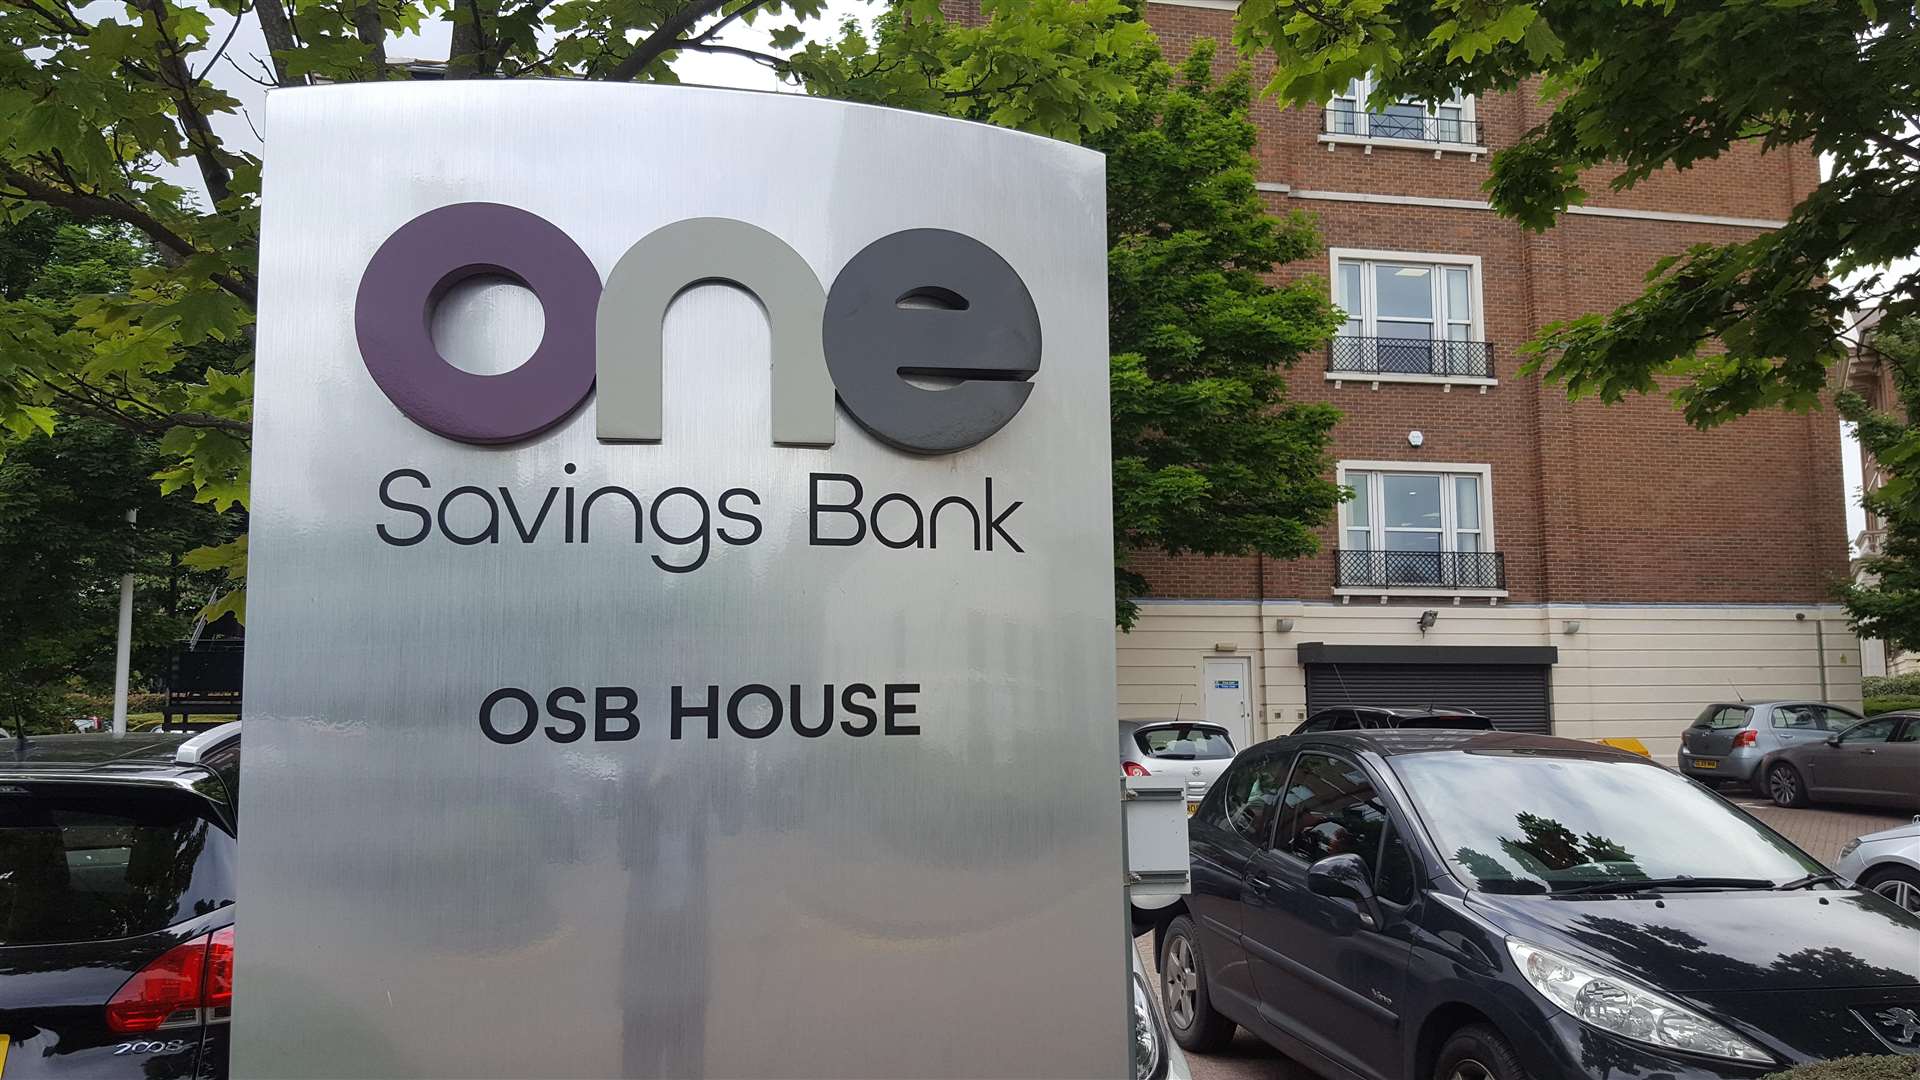 OneSavings Bank's headquarters in Chatham Maritime